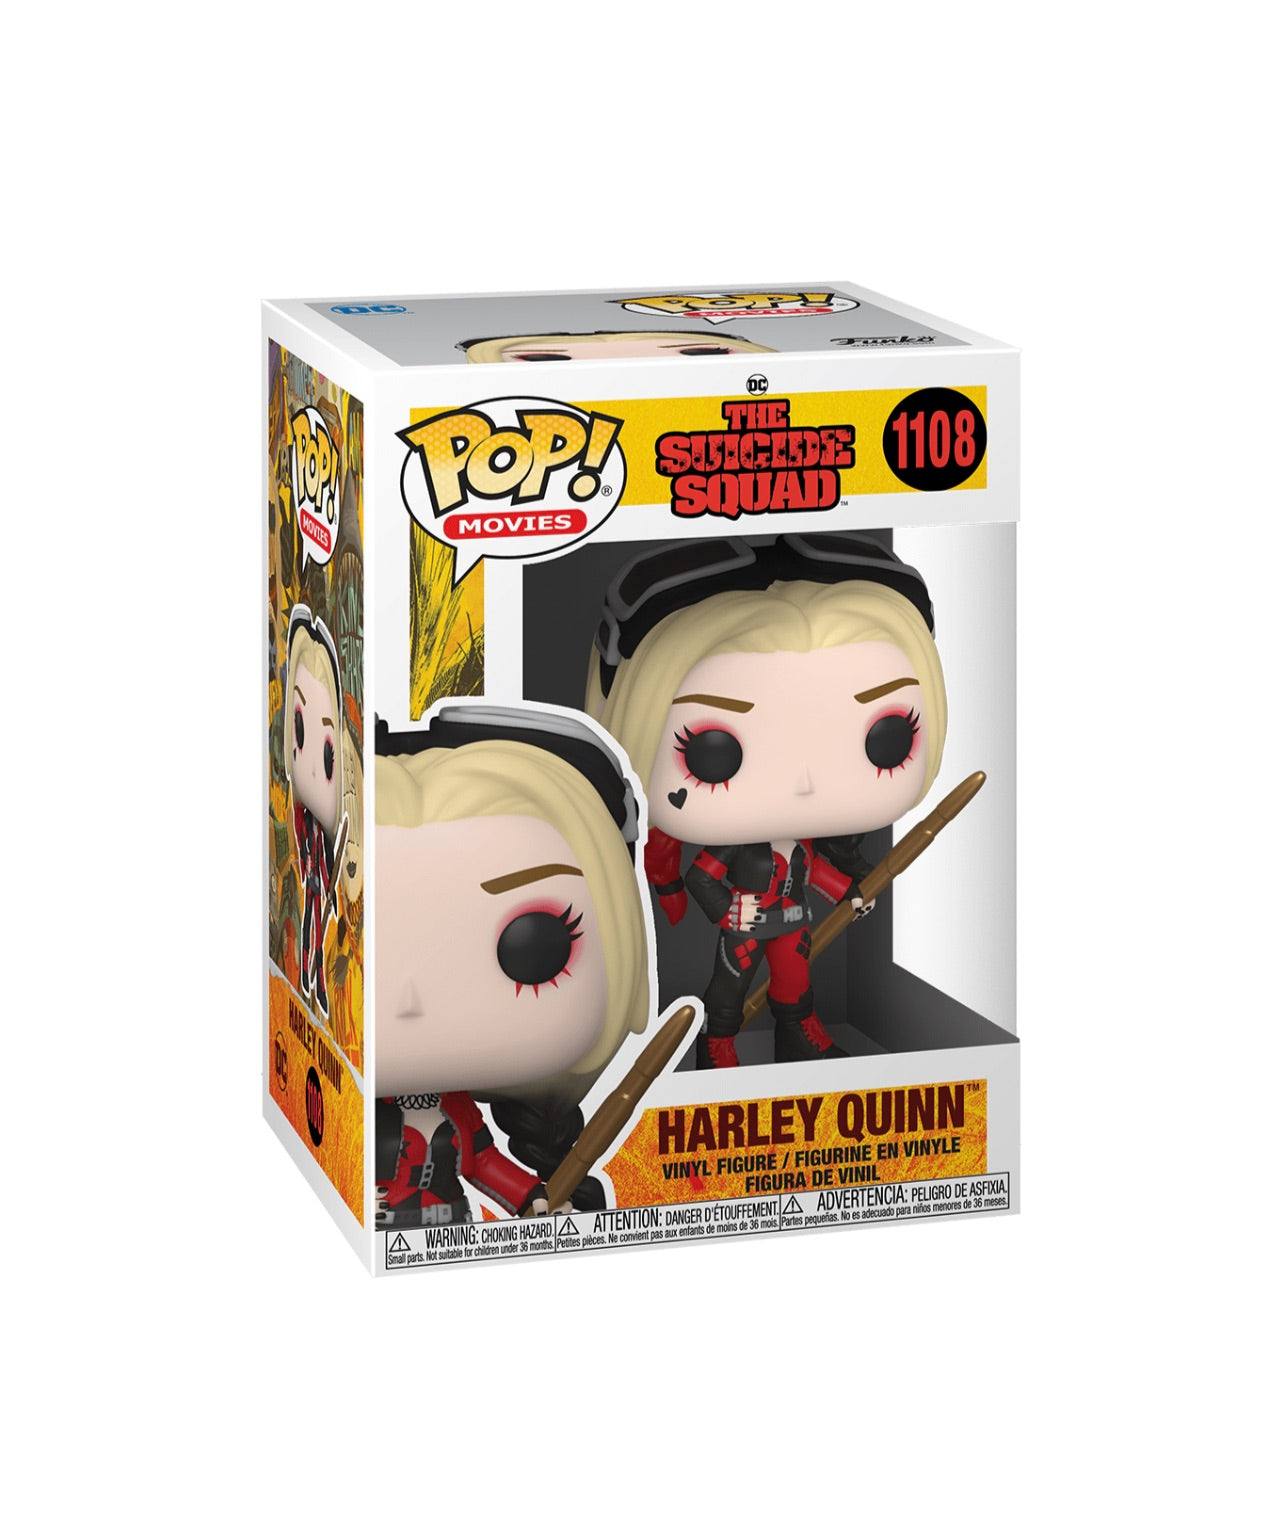 POP! Movies Suicide Squad Harley Quinn #1108